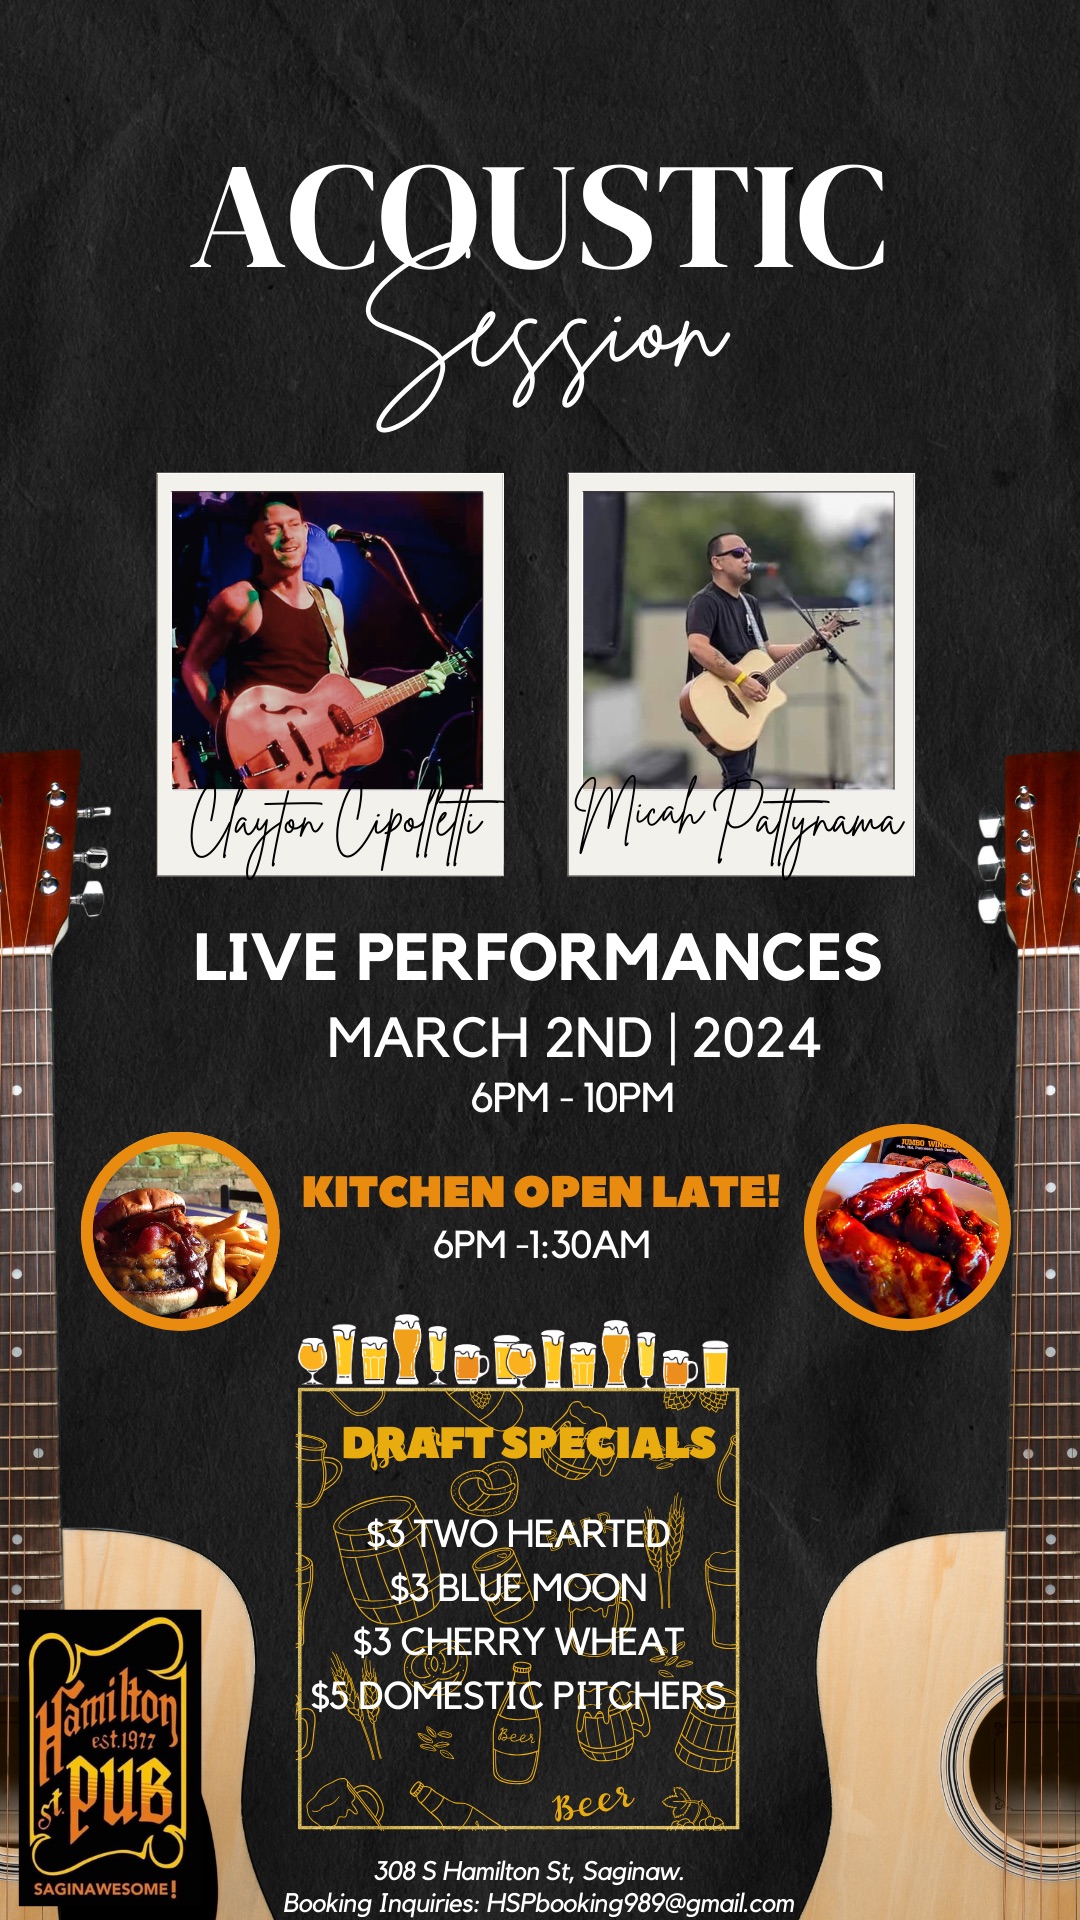 Acoustic Sessions | Micah Pattynama & Clayton Cipolletti